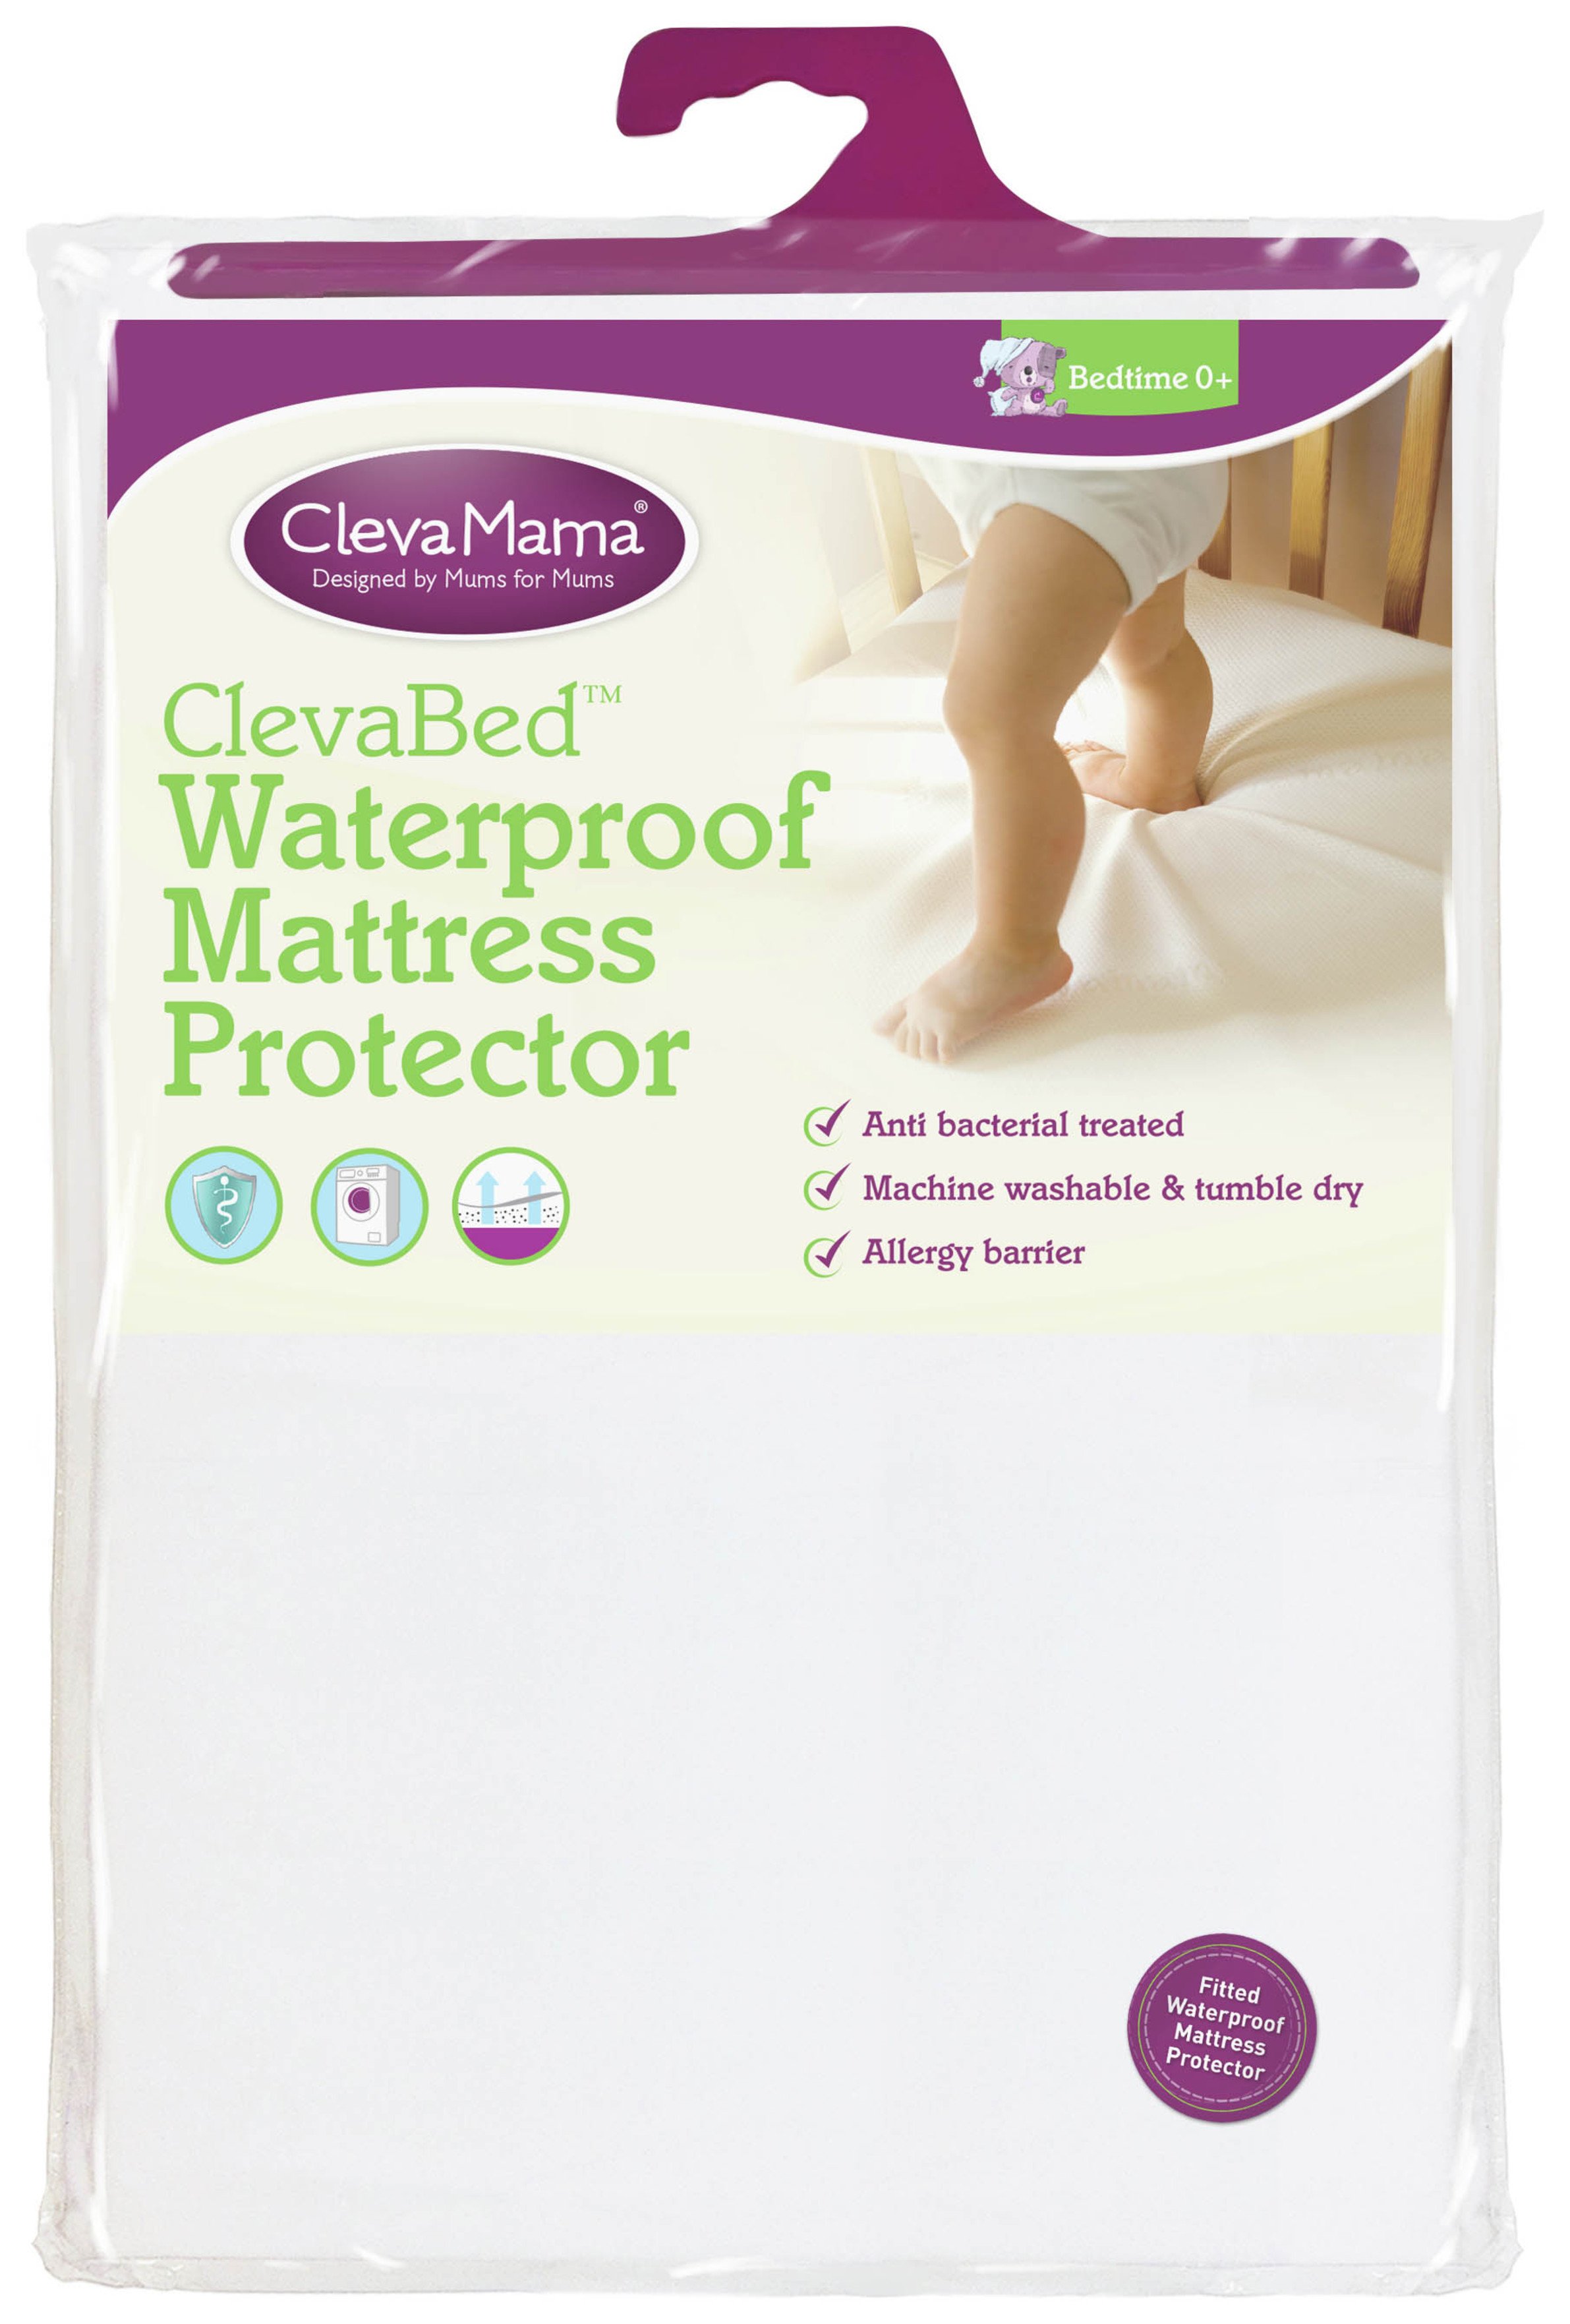 Clevamama Cotton Waterproof Mattress Protector - Double.